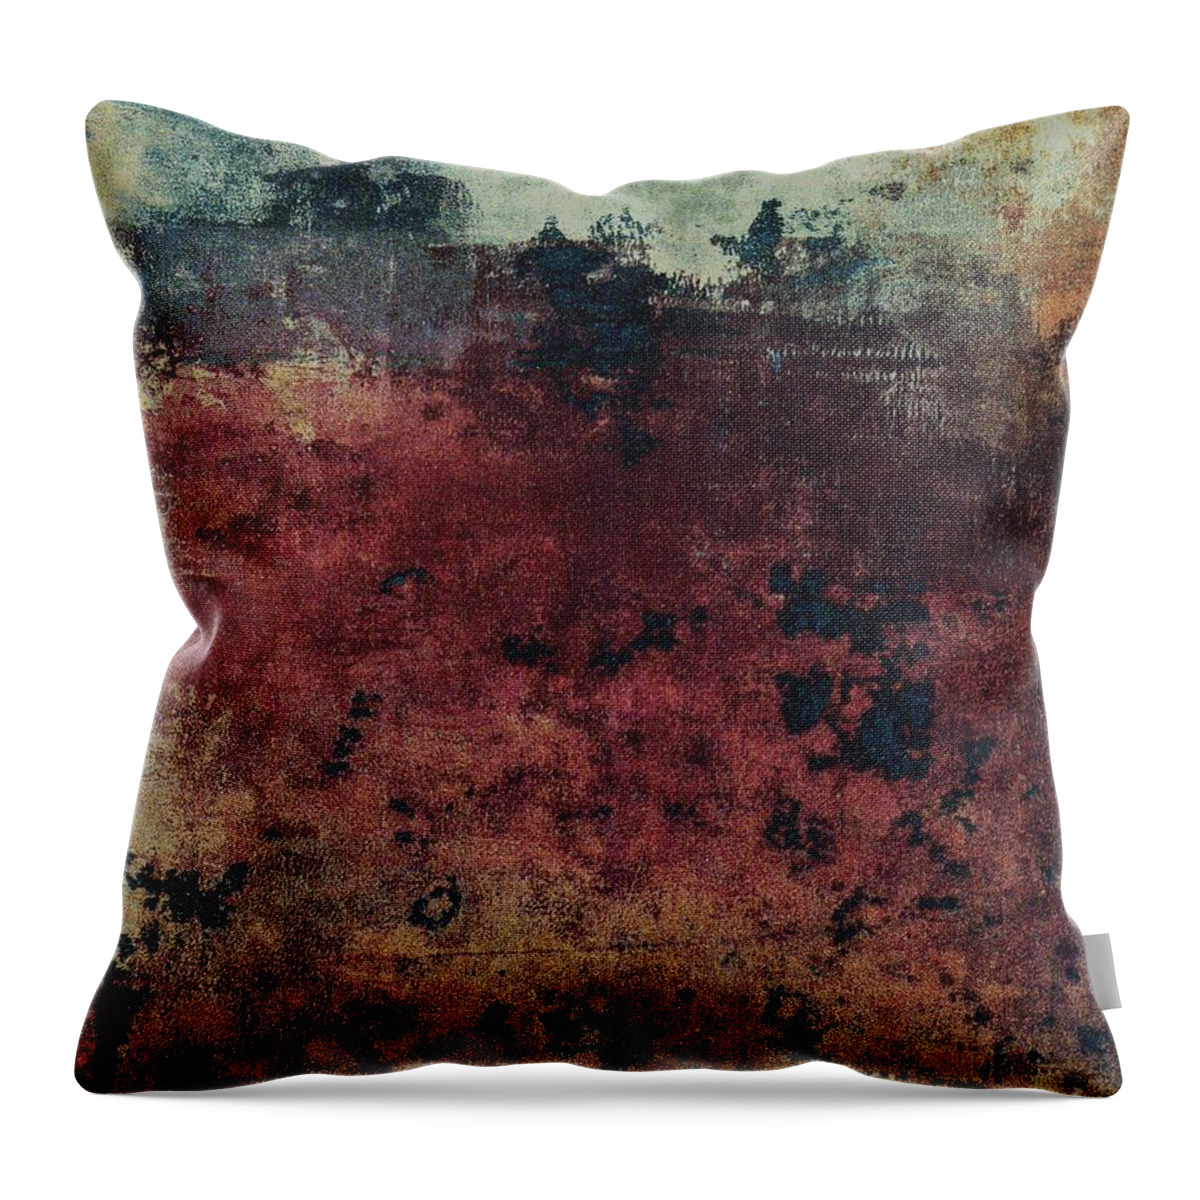 Writermore Throw Pillow featuring the mixed media Ser. 1 #03 by Writermore Arts